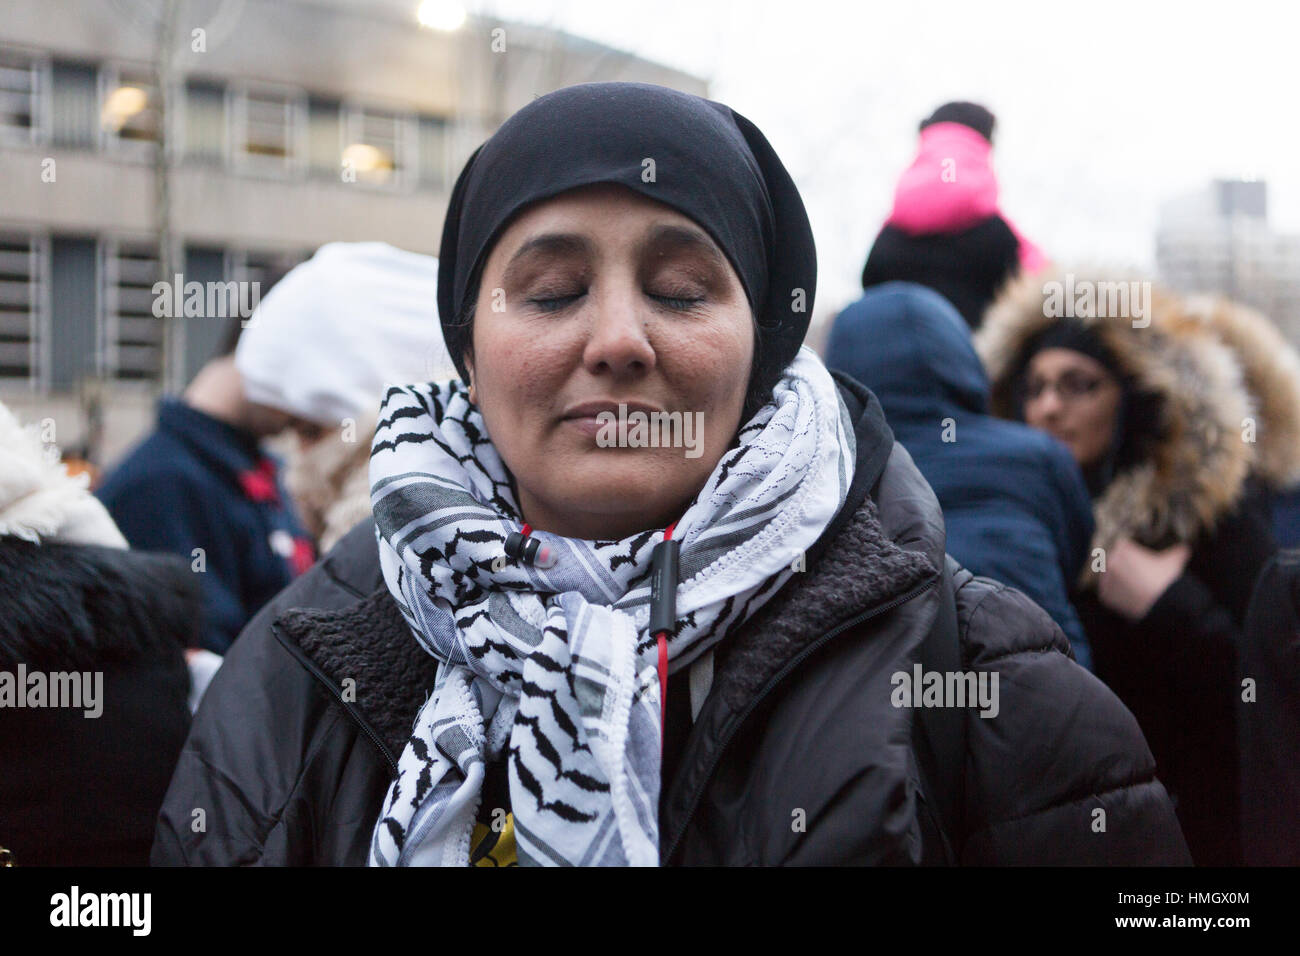 Brooklyn, New York, United States. 2nd February, 2017. Heba Omar, a Pre K- 2nd grade teacher from PS 261 in Brooklyn holds back tears as she recounts her students' confusion and sadness around President Trump's statements against Muslims. She participates in a rally with thousands of people after the “bodega strike” in front of Brooklyn Borough Hall in New York City against the Trump administration's immigration policies. Mansura Khanam/ Alamy Live News Stock Photo